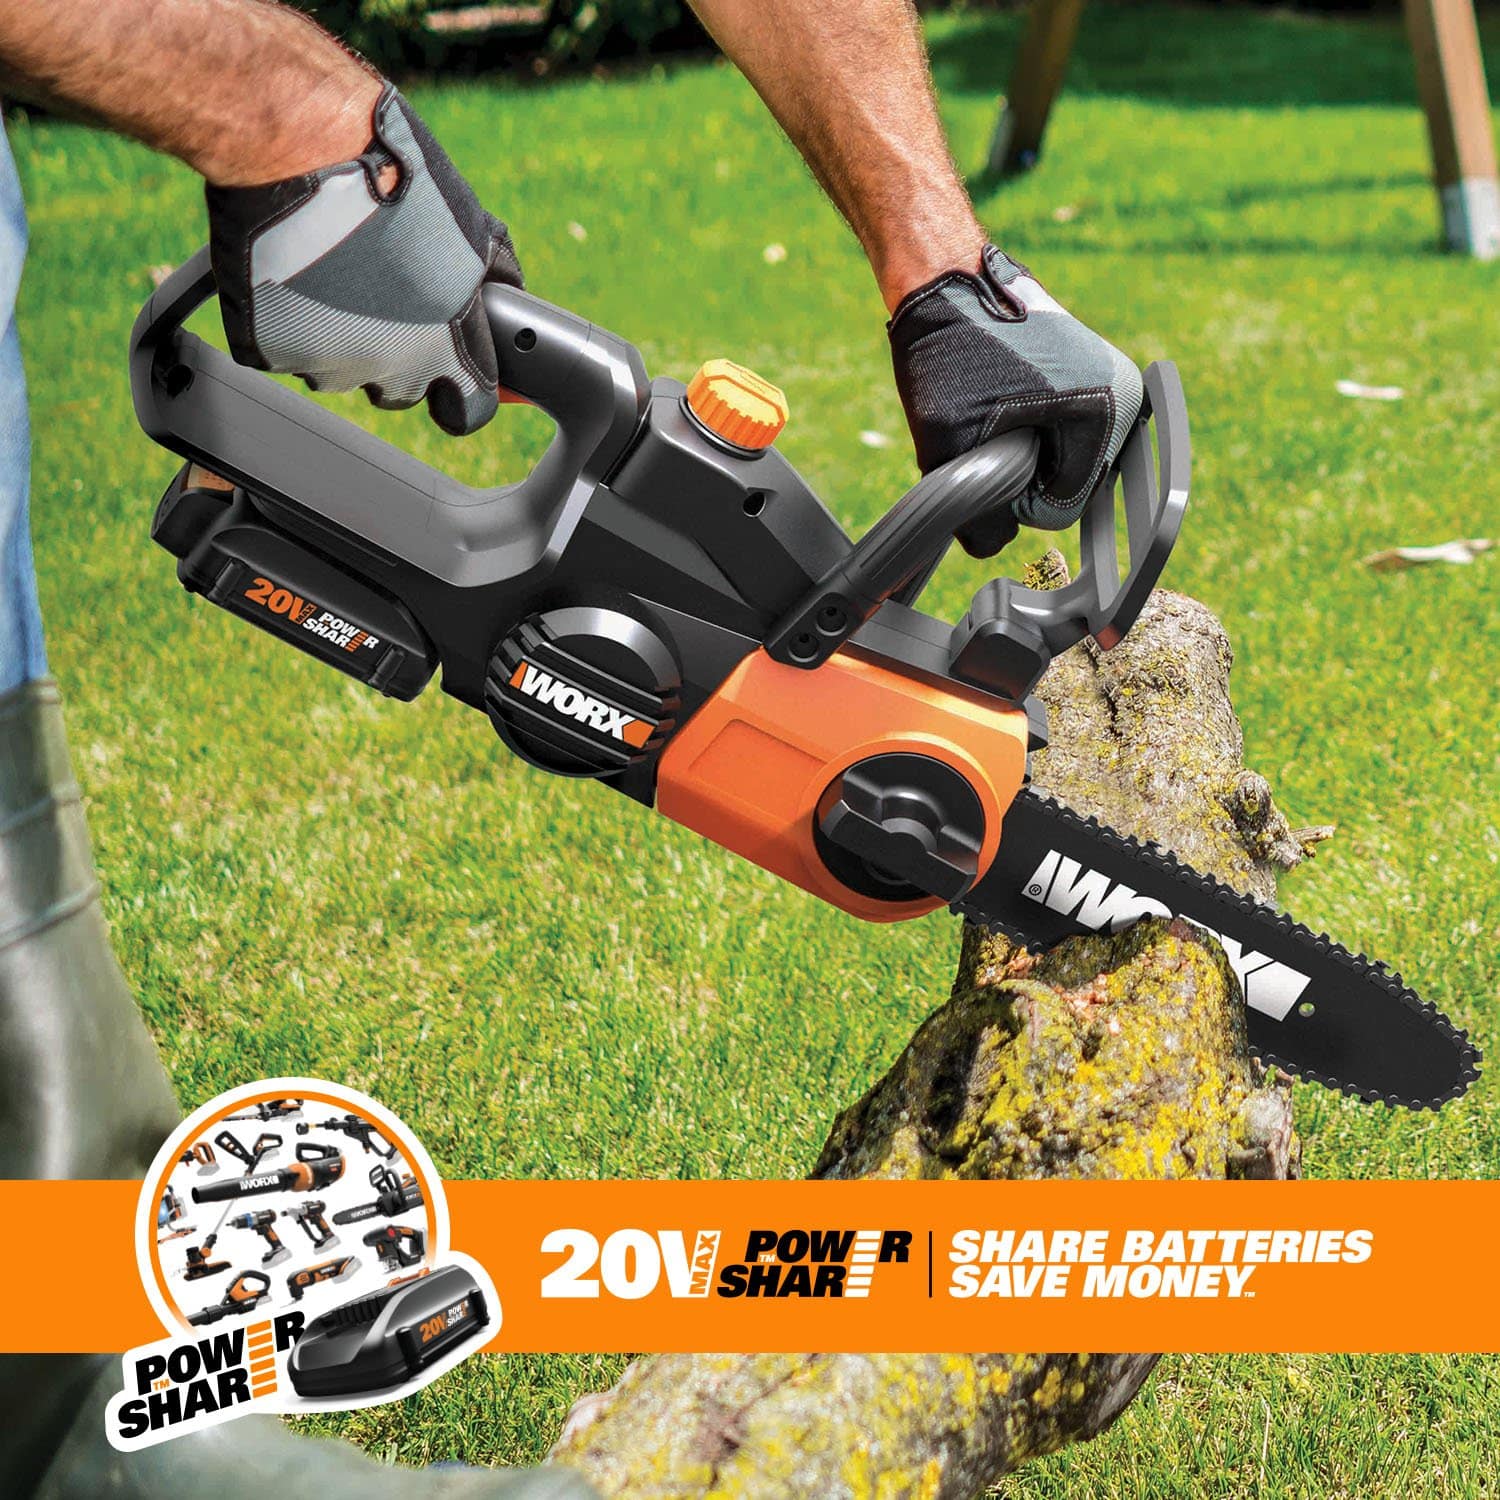 Top 10 Best Electric Chainsaws in 2021 Reviews Buyer's Guide